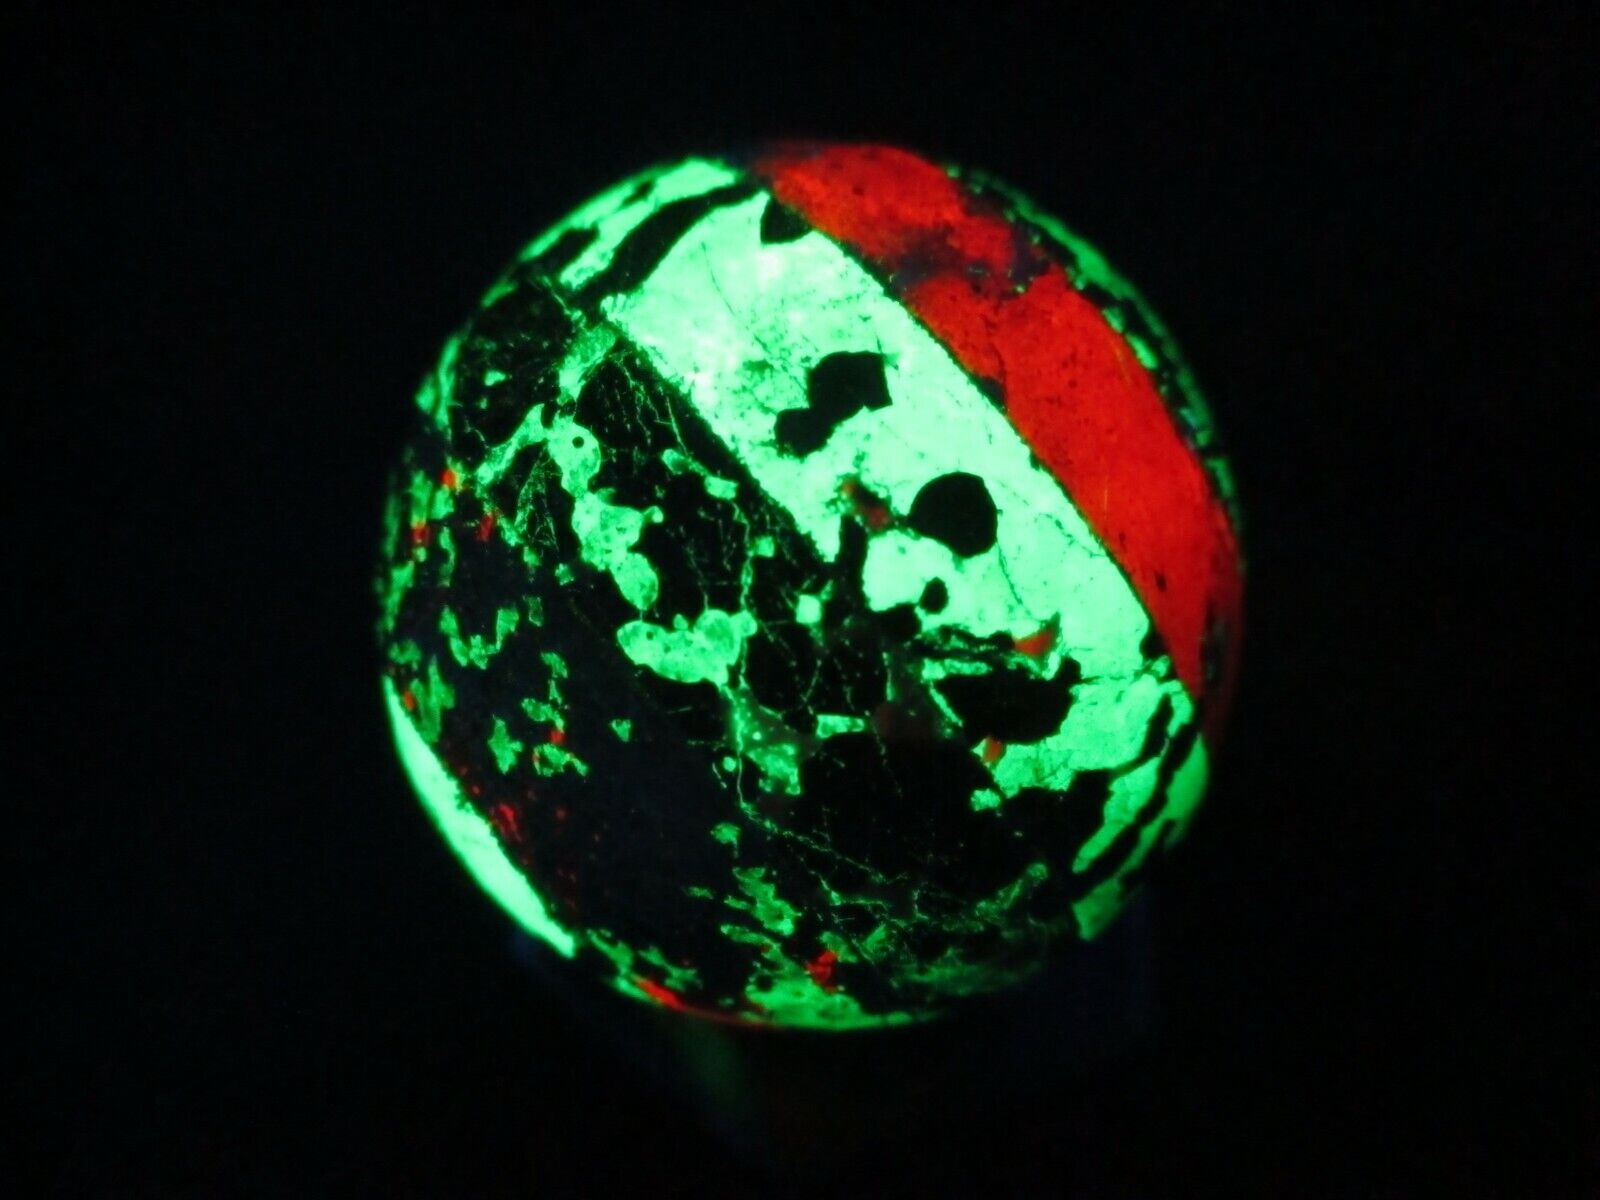 Fluorescent Willemite & Calcite Sphere, Franklin, NJ #4 (with free stand)